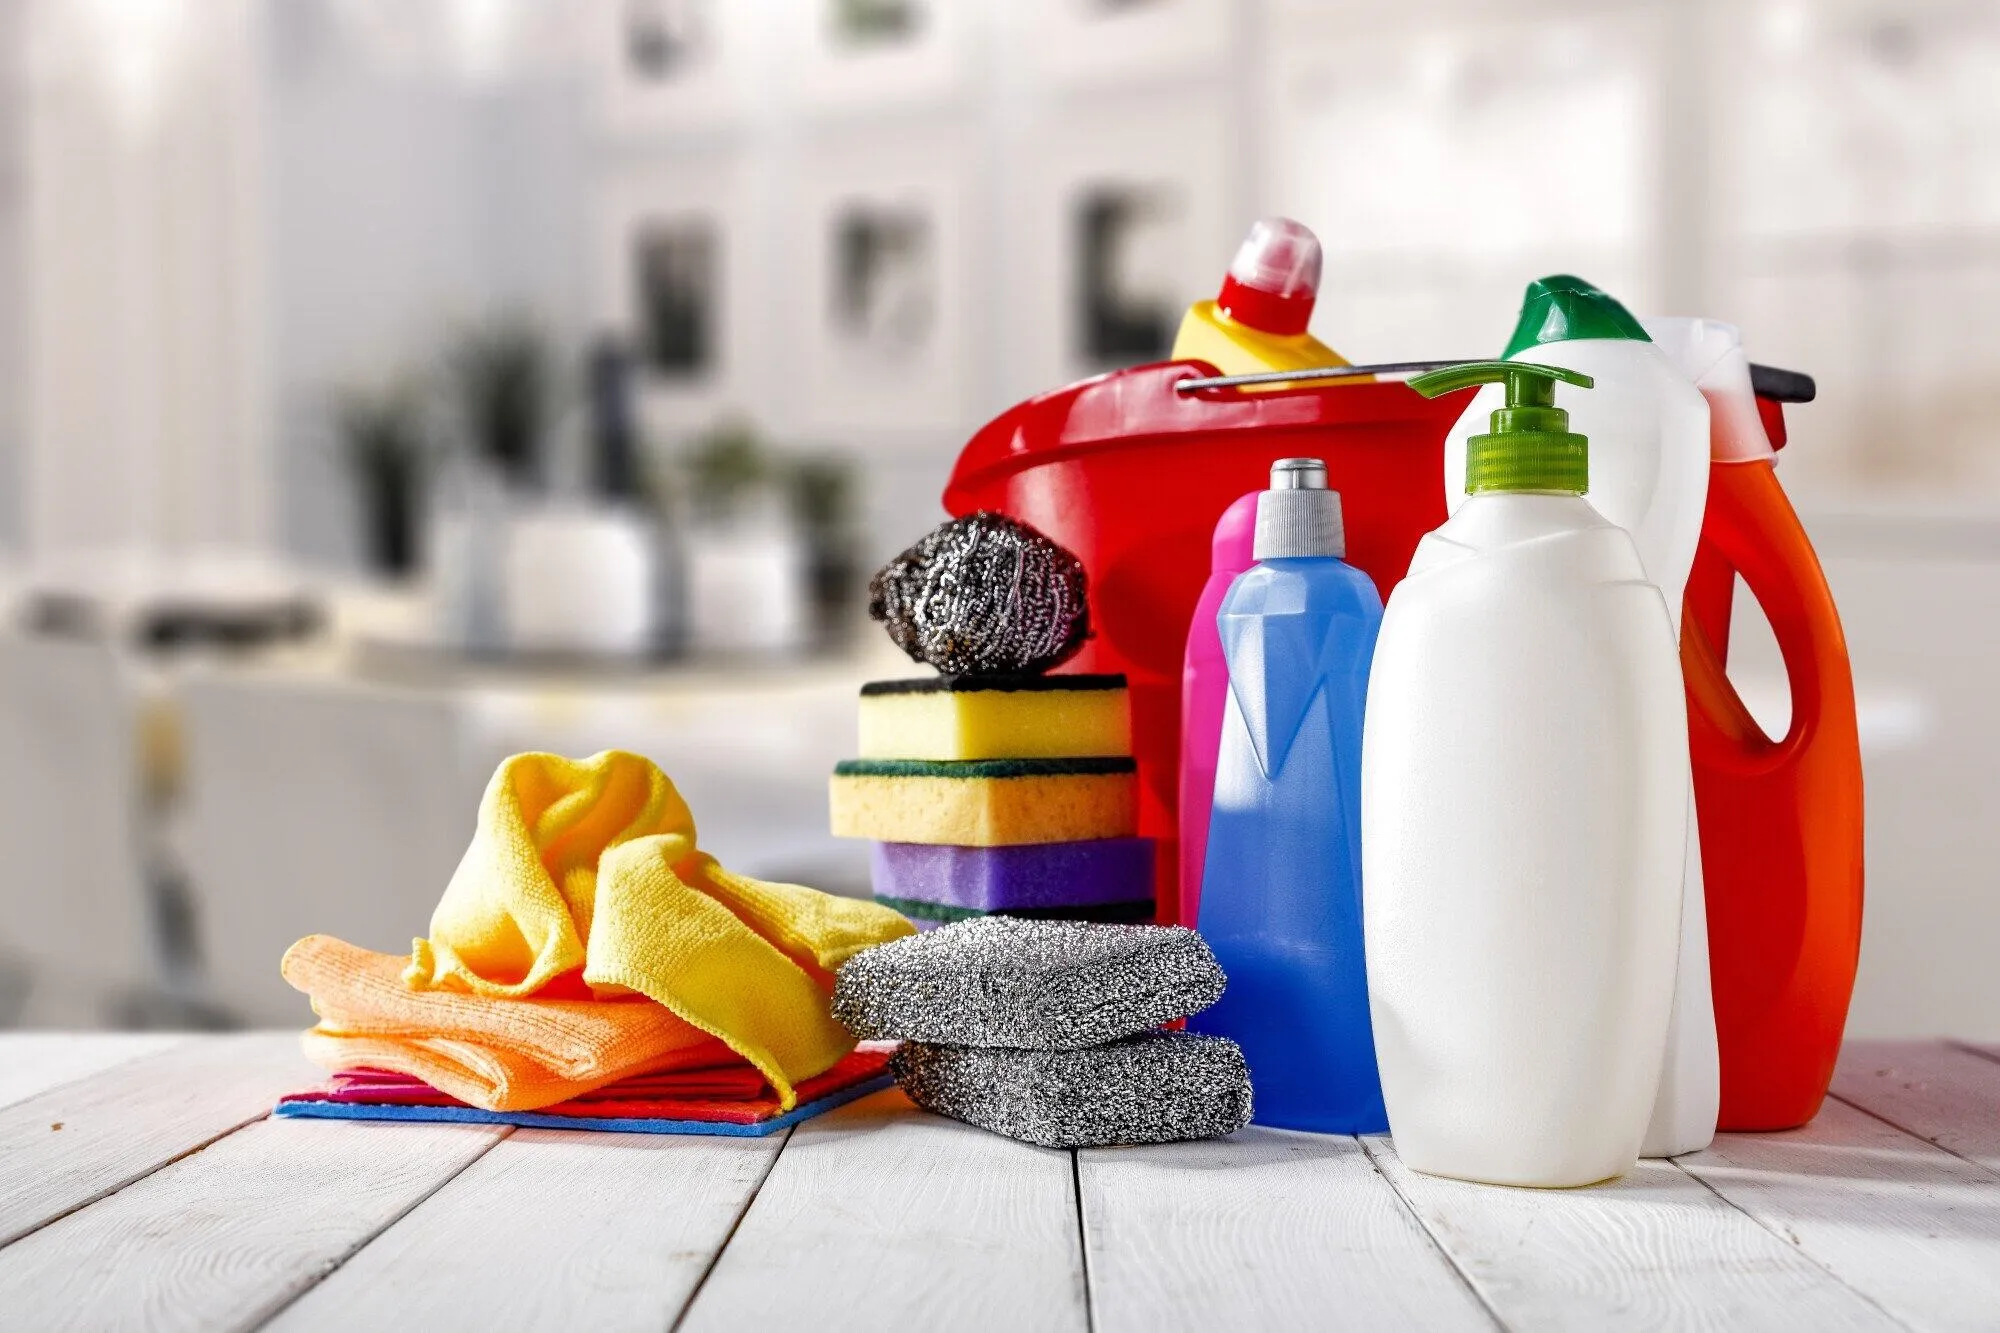 The Ultimate Guide to Choosing the Right General Purpose Cleaner for Your Home